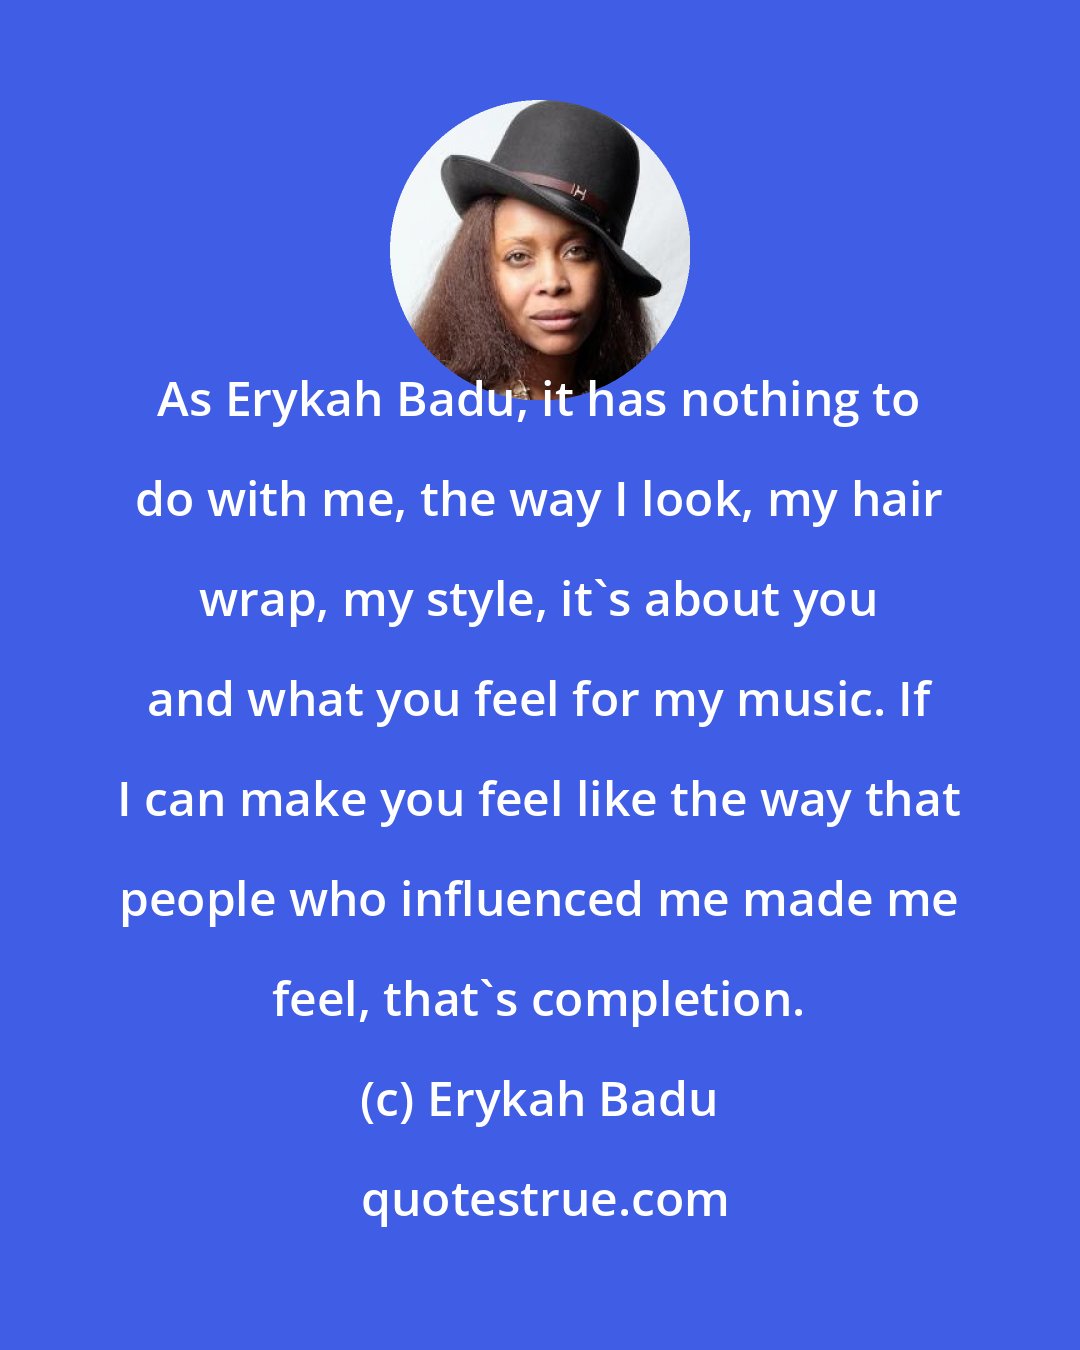 Erykah Badu: As Erykah Badu, it has nothing to do with me, the way I look, my hair wrap, my style, it's about you and what you feel for my music. If I can make you feel like the way that people who influenced me made me feel, that's completion.